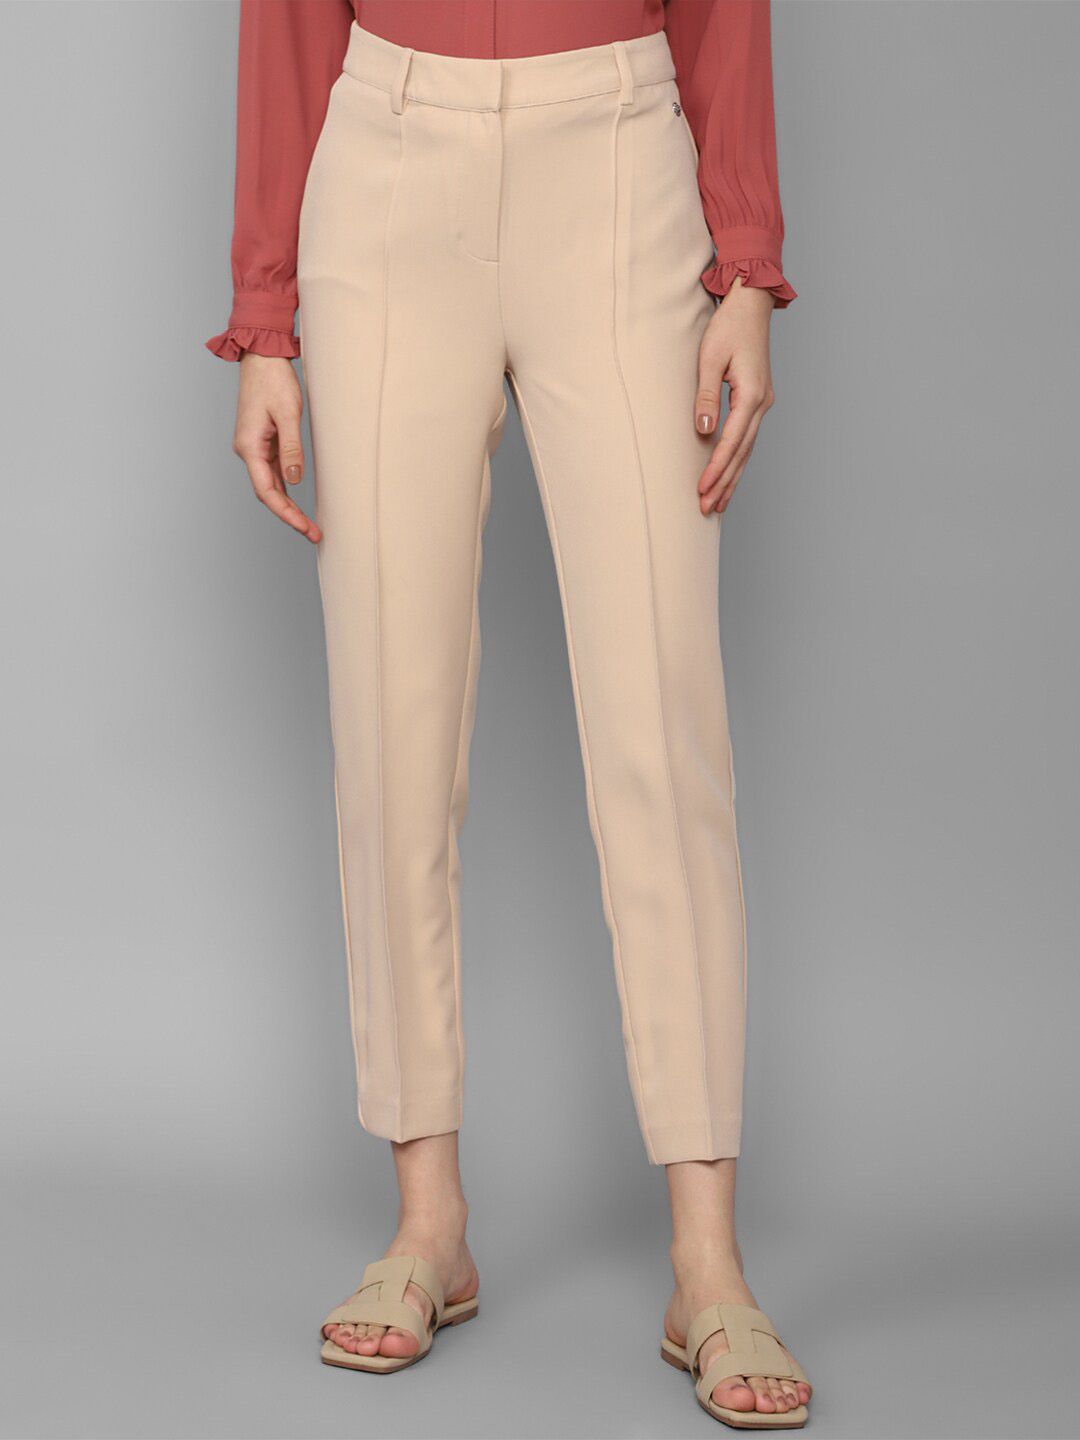 Allen Solly Woman Mid-Rise Cropped Trousers Price in India